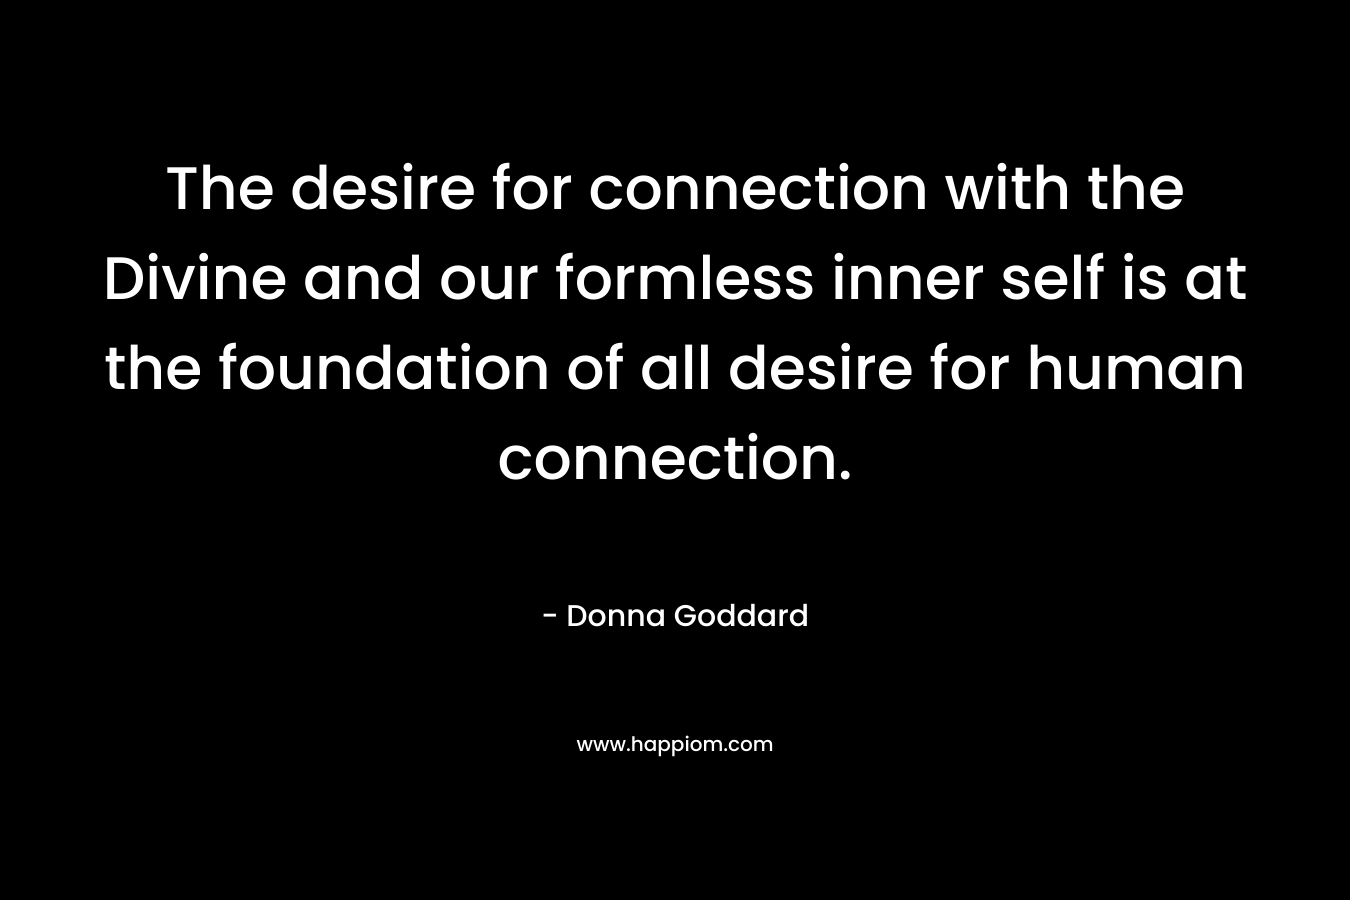 The desire for connection with the Divine and our formless inner self is at the foundation of all desire for human connection.